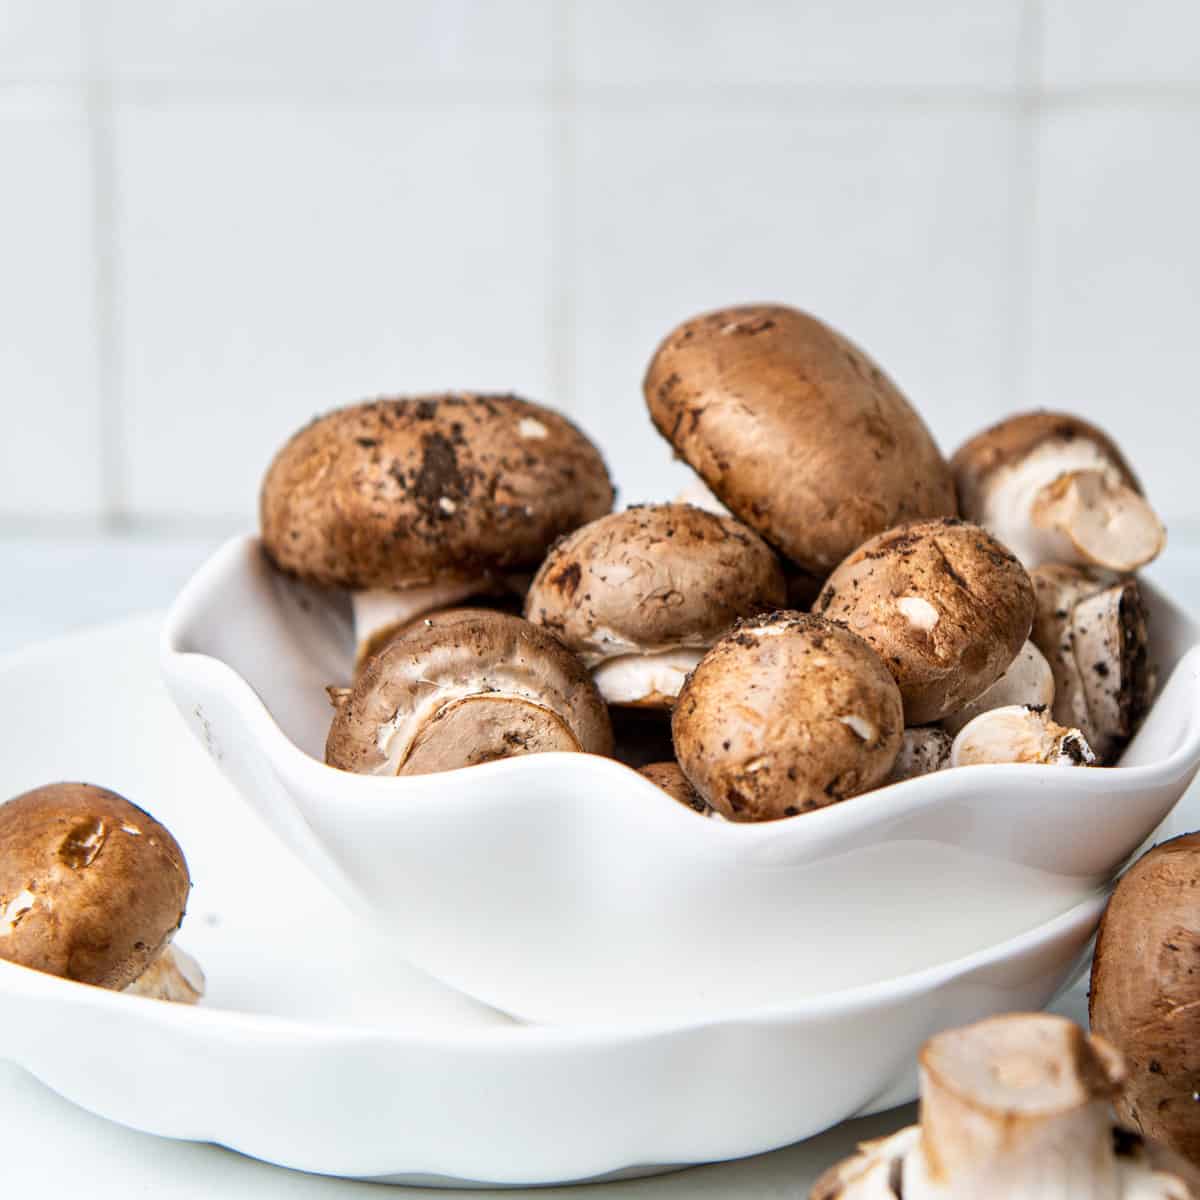 Mushrooms in a bowl on the counter.